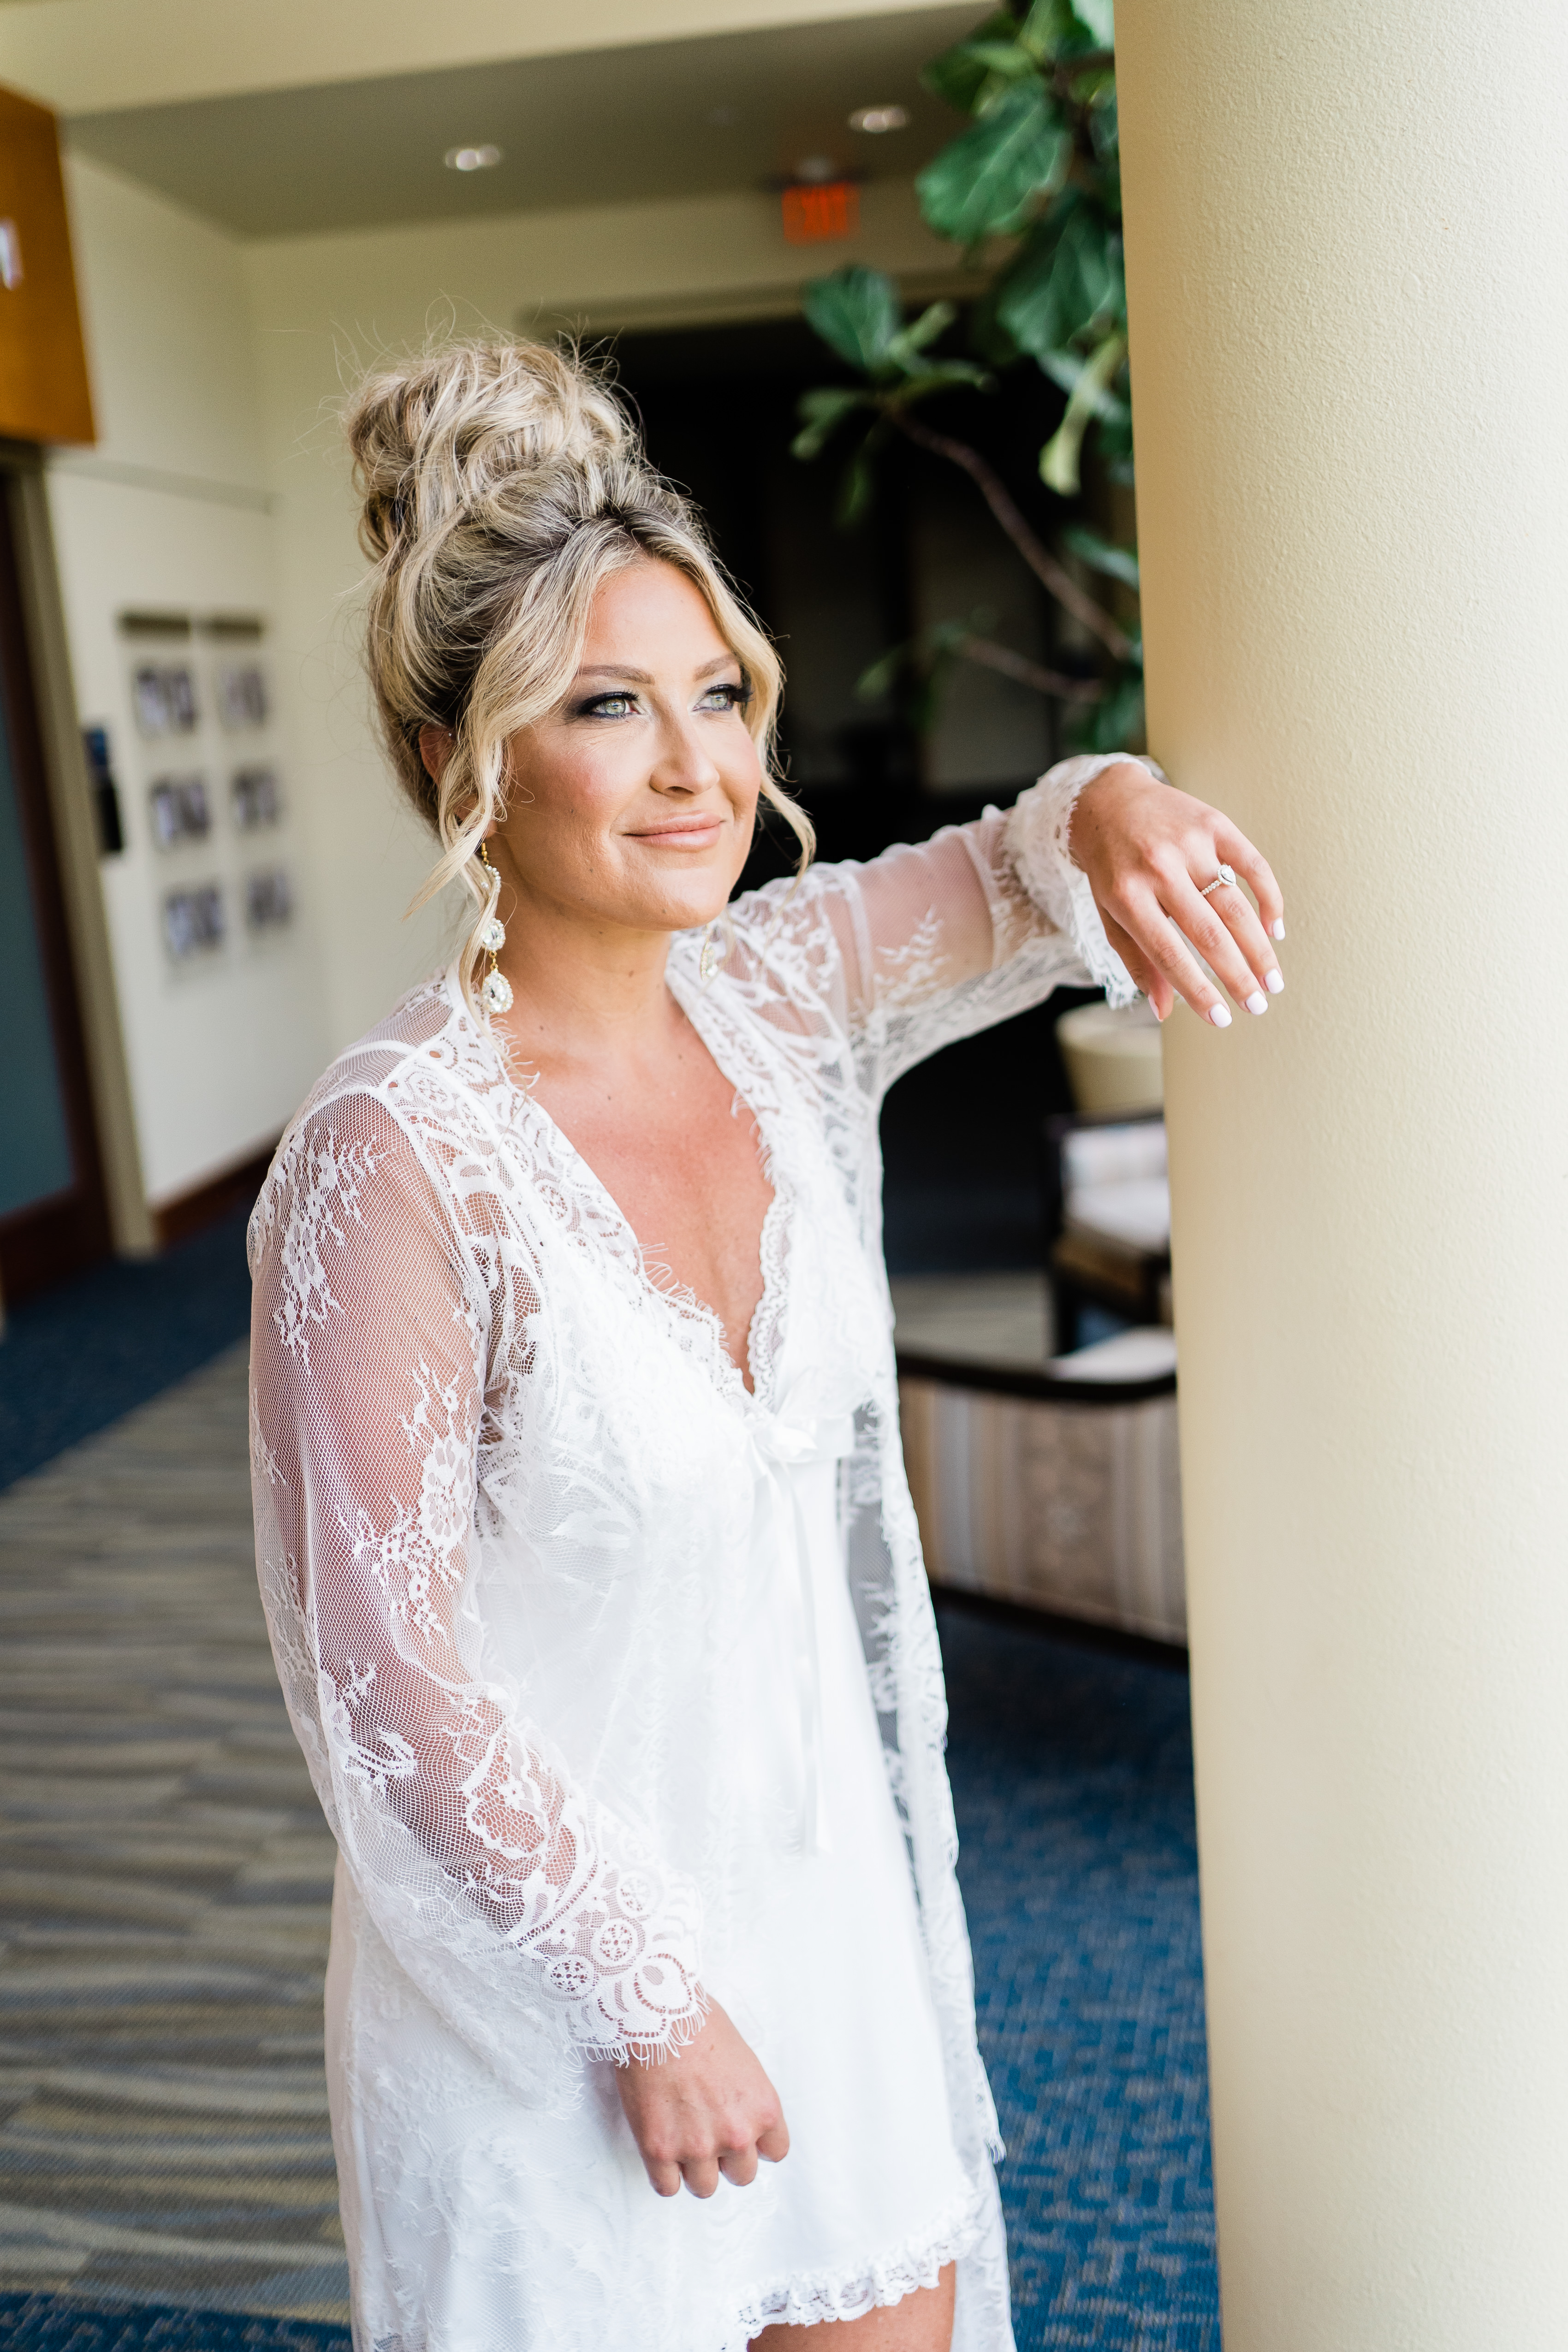 Indiana wedding photographer captures bride wearing robe and smiling